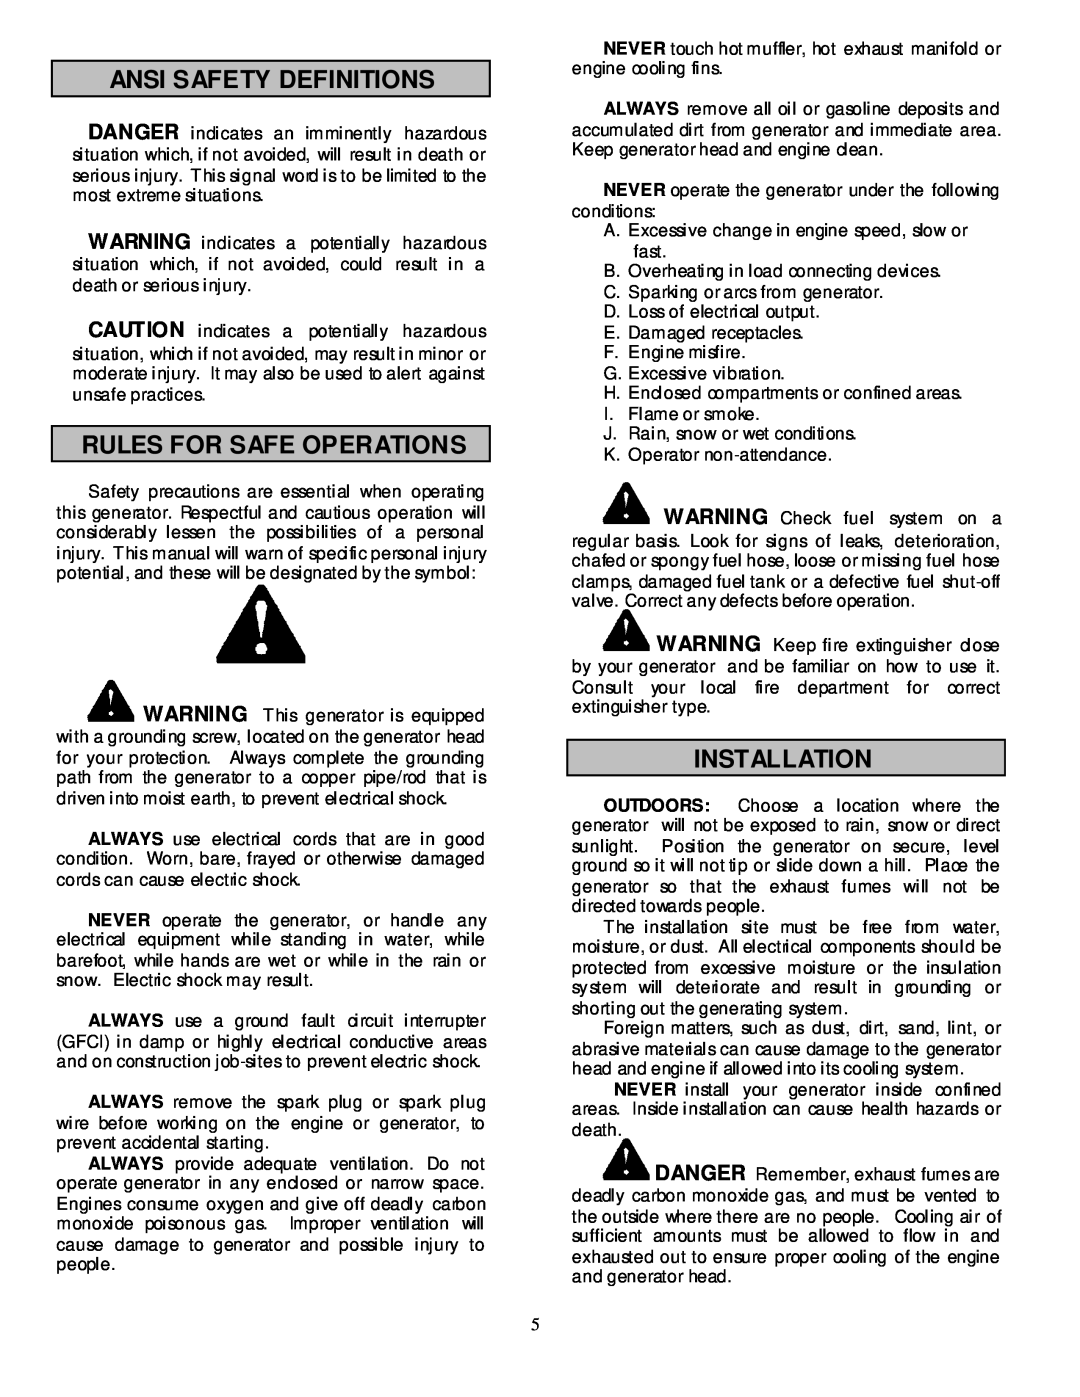 Northern Industrial Tools 15000 PPG owner manual Ansi Safety Definitions, Rules For Safe Operations, Installation 